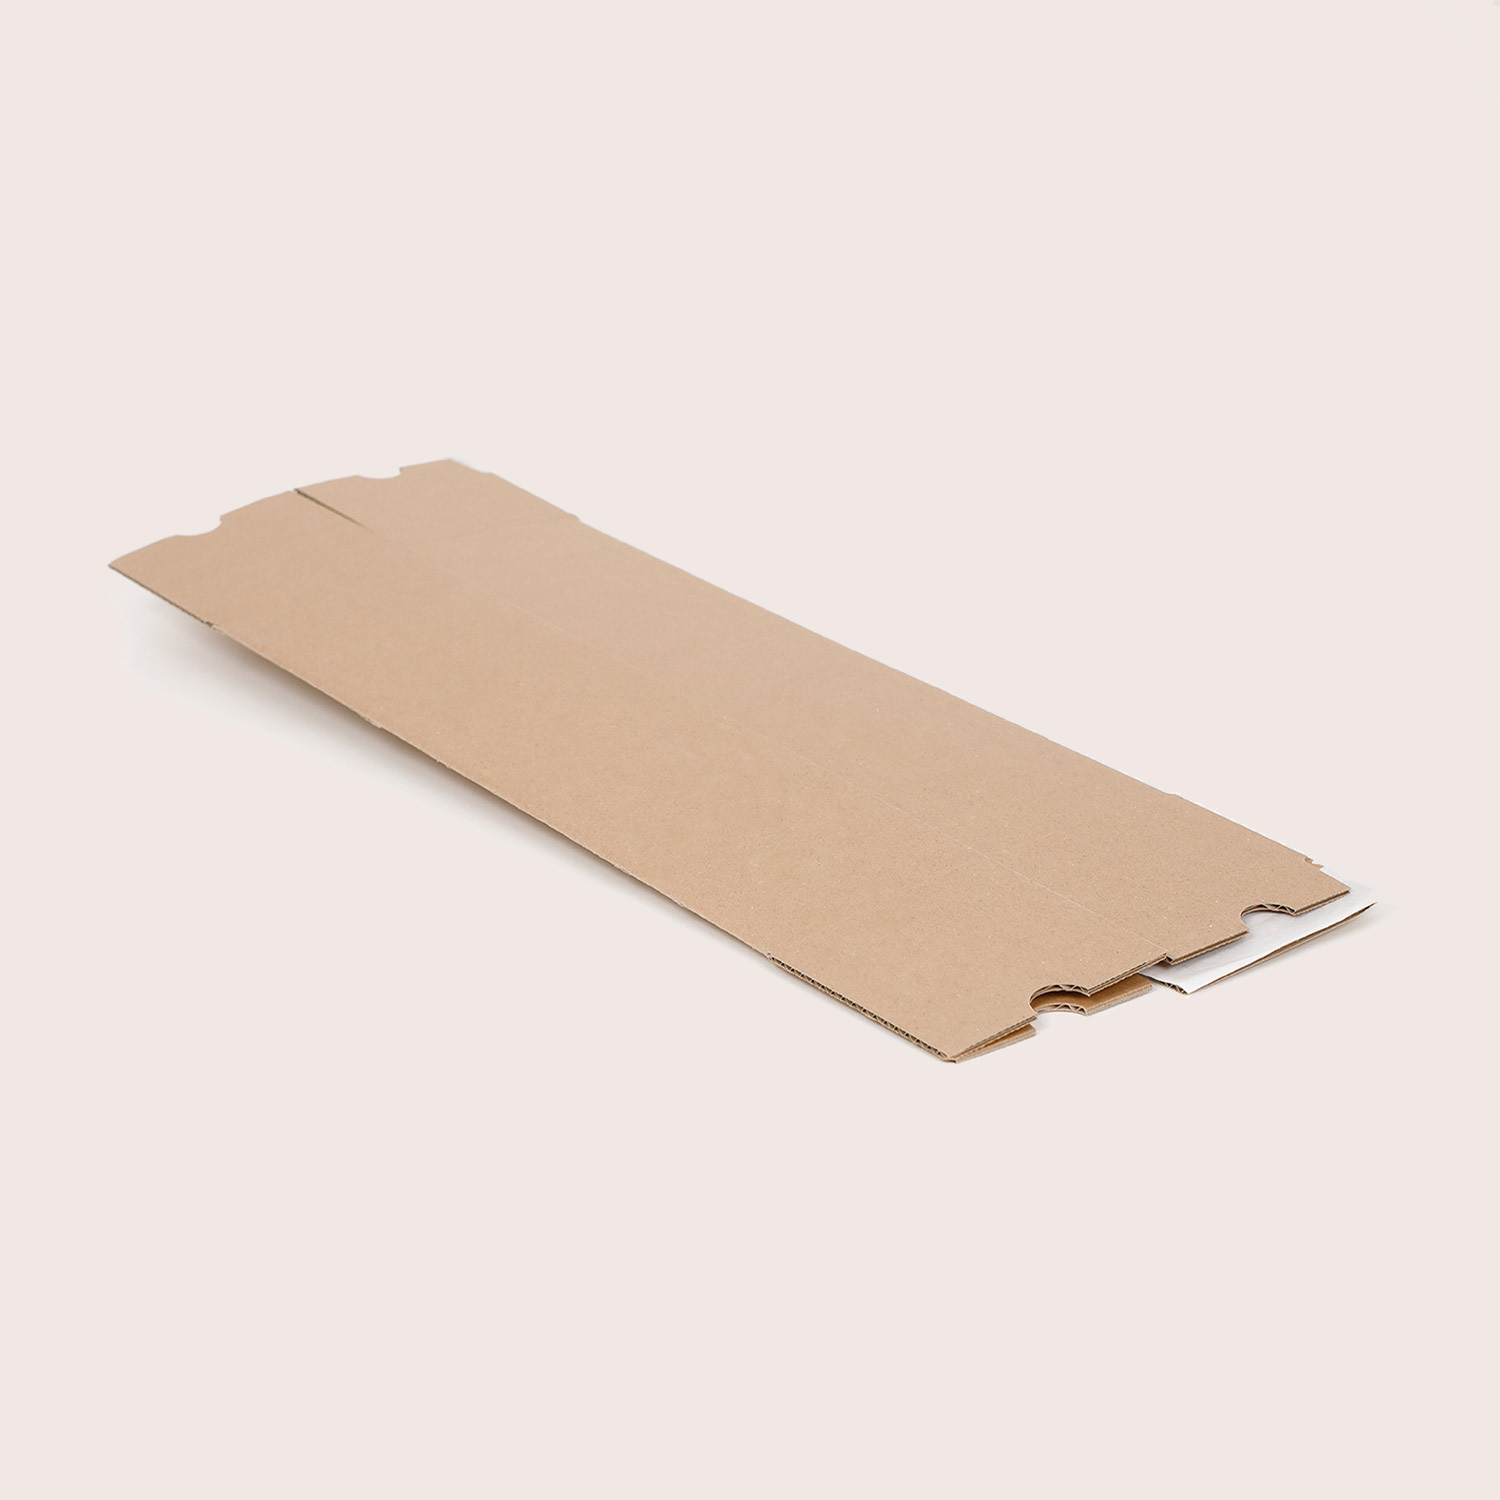 Purchase shipping sleeves from the manufacturer